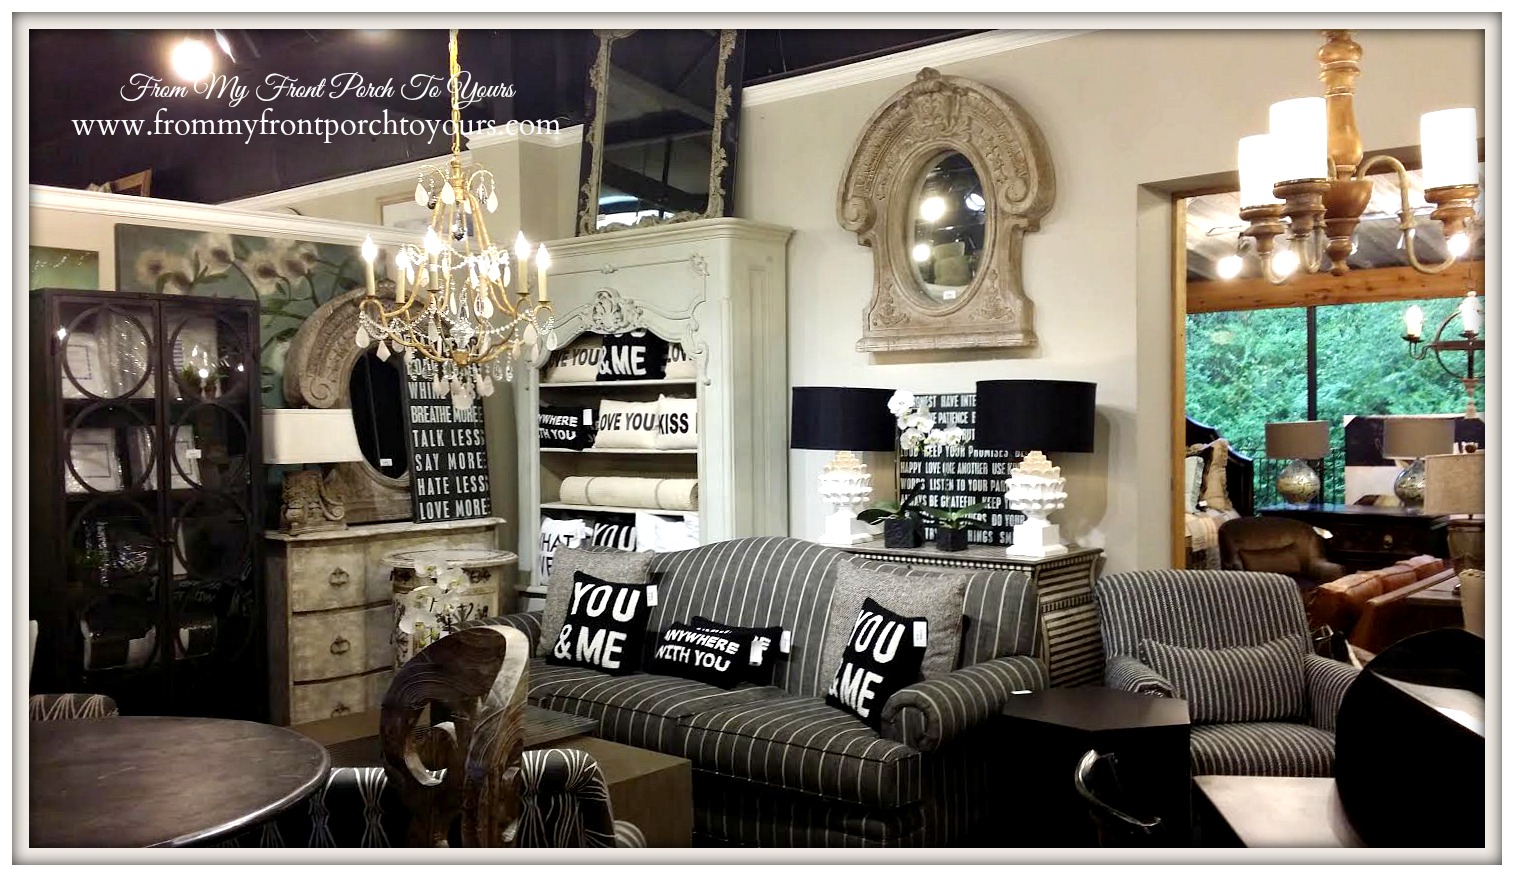 Laurie's Home Furnishings- From My Front Porch To Yours